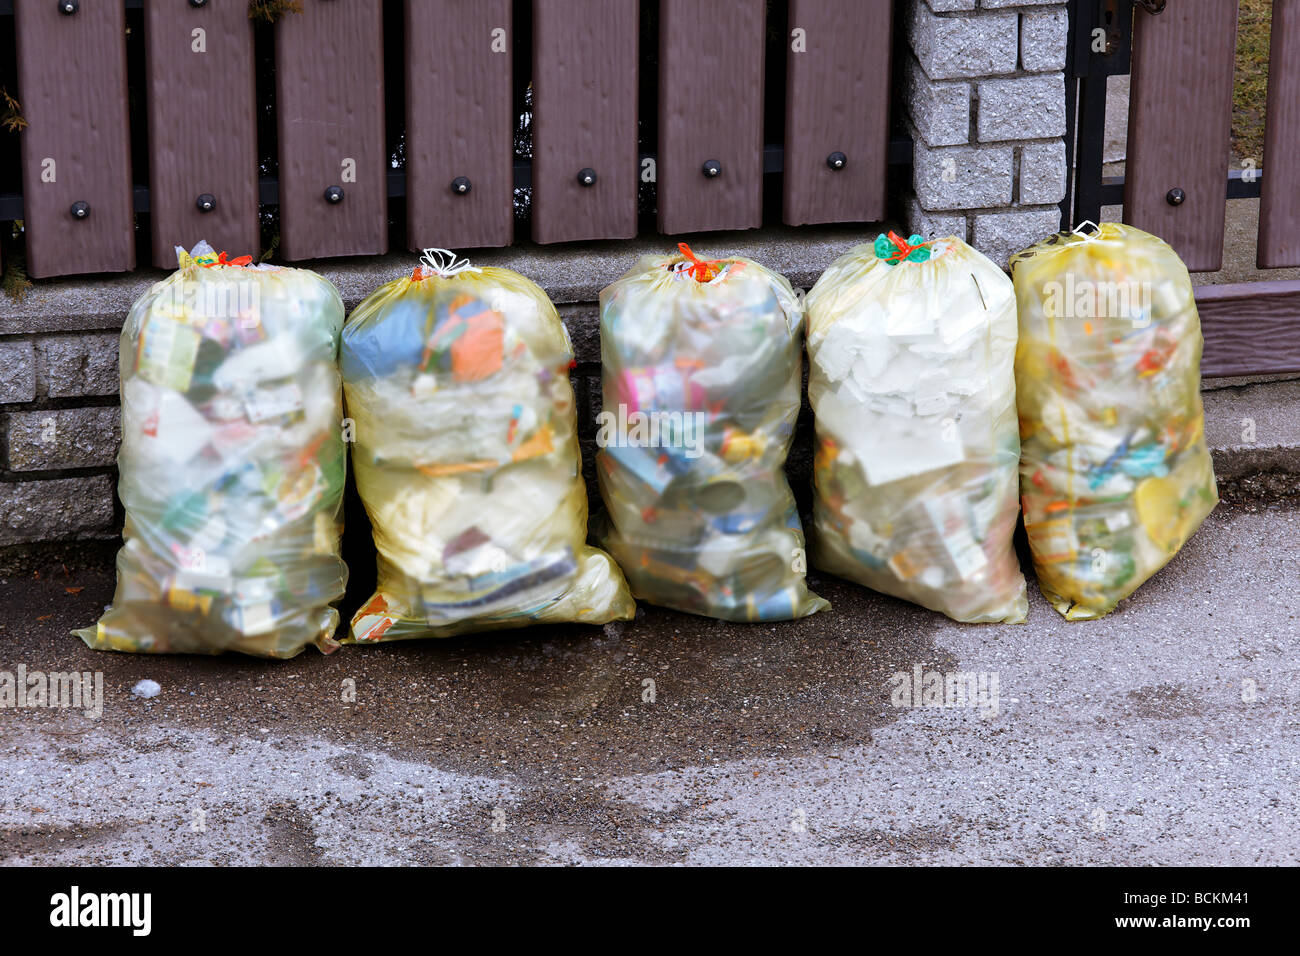 https://c8.alamy.com/comp/BCKM41/garbage-bags-of-plastic-waste-are-waiting-for-waste-disposal-BCKM41.jpg